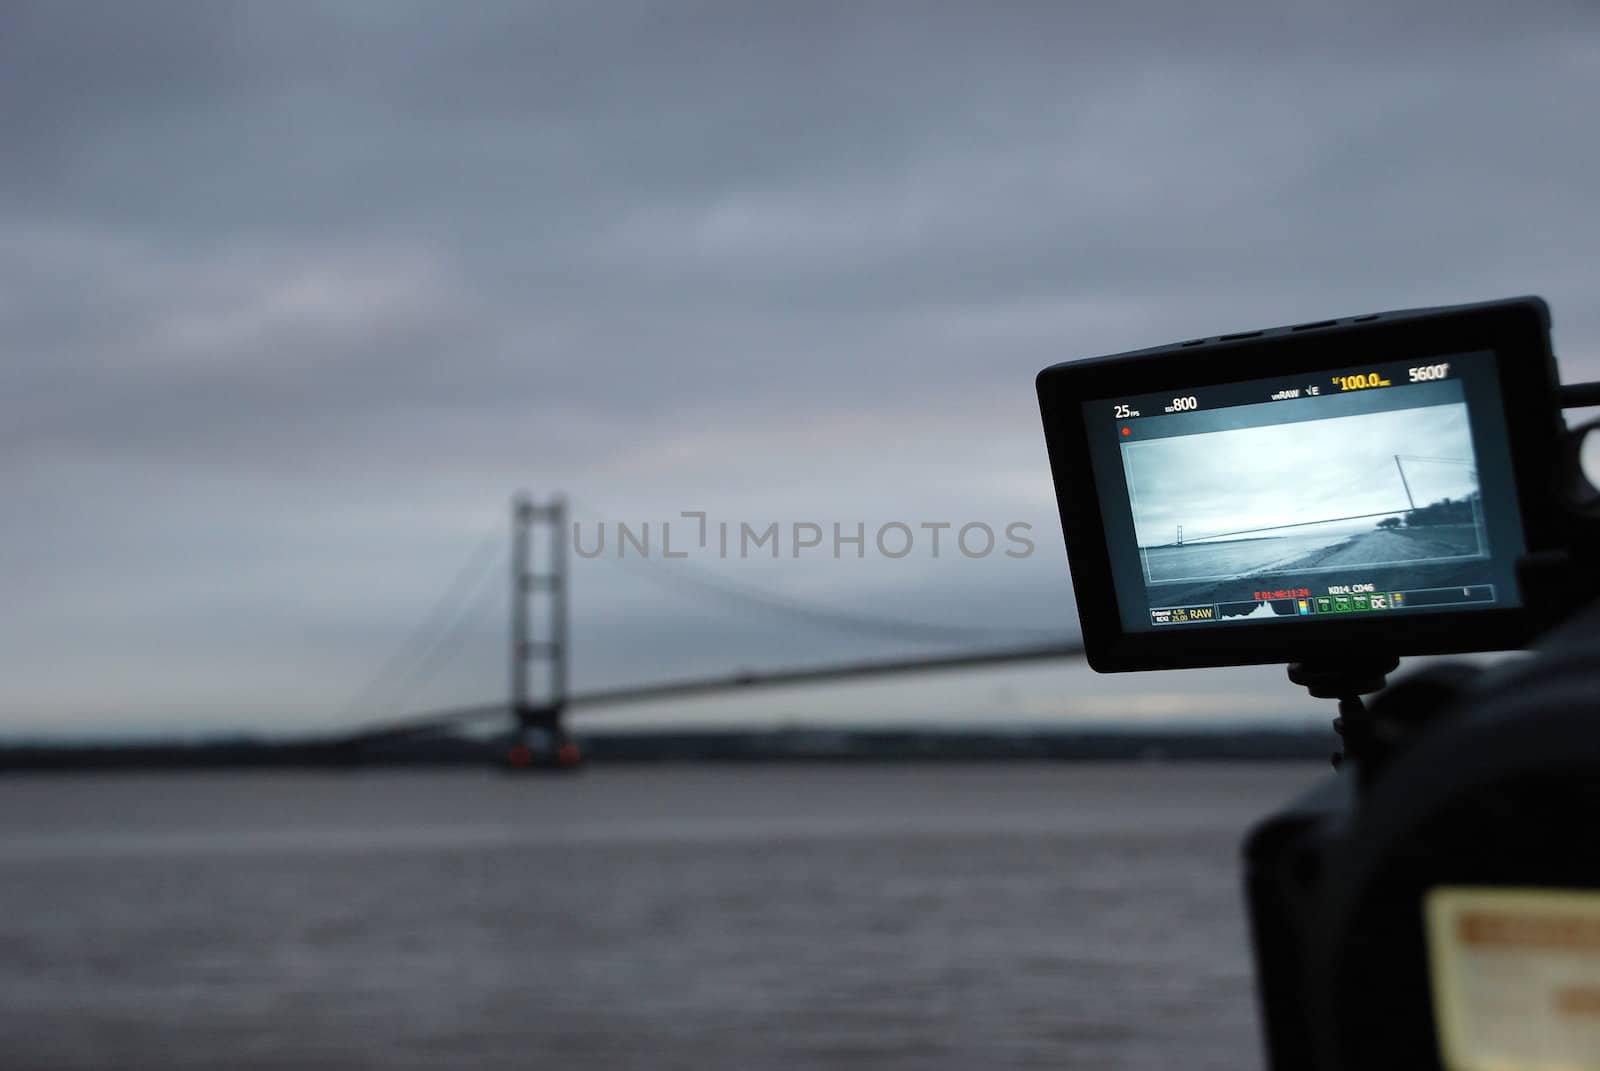 Humber Bridge being filmed from the river bank at dusk on a professional video camera